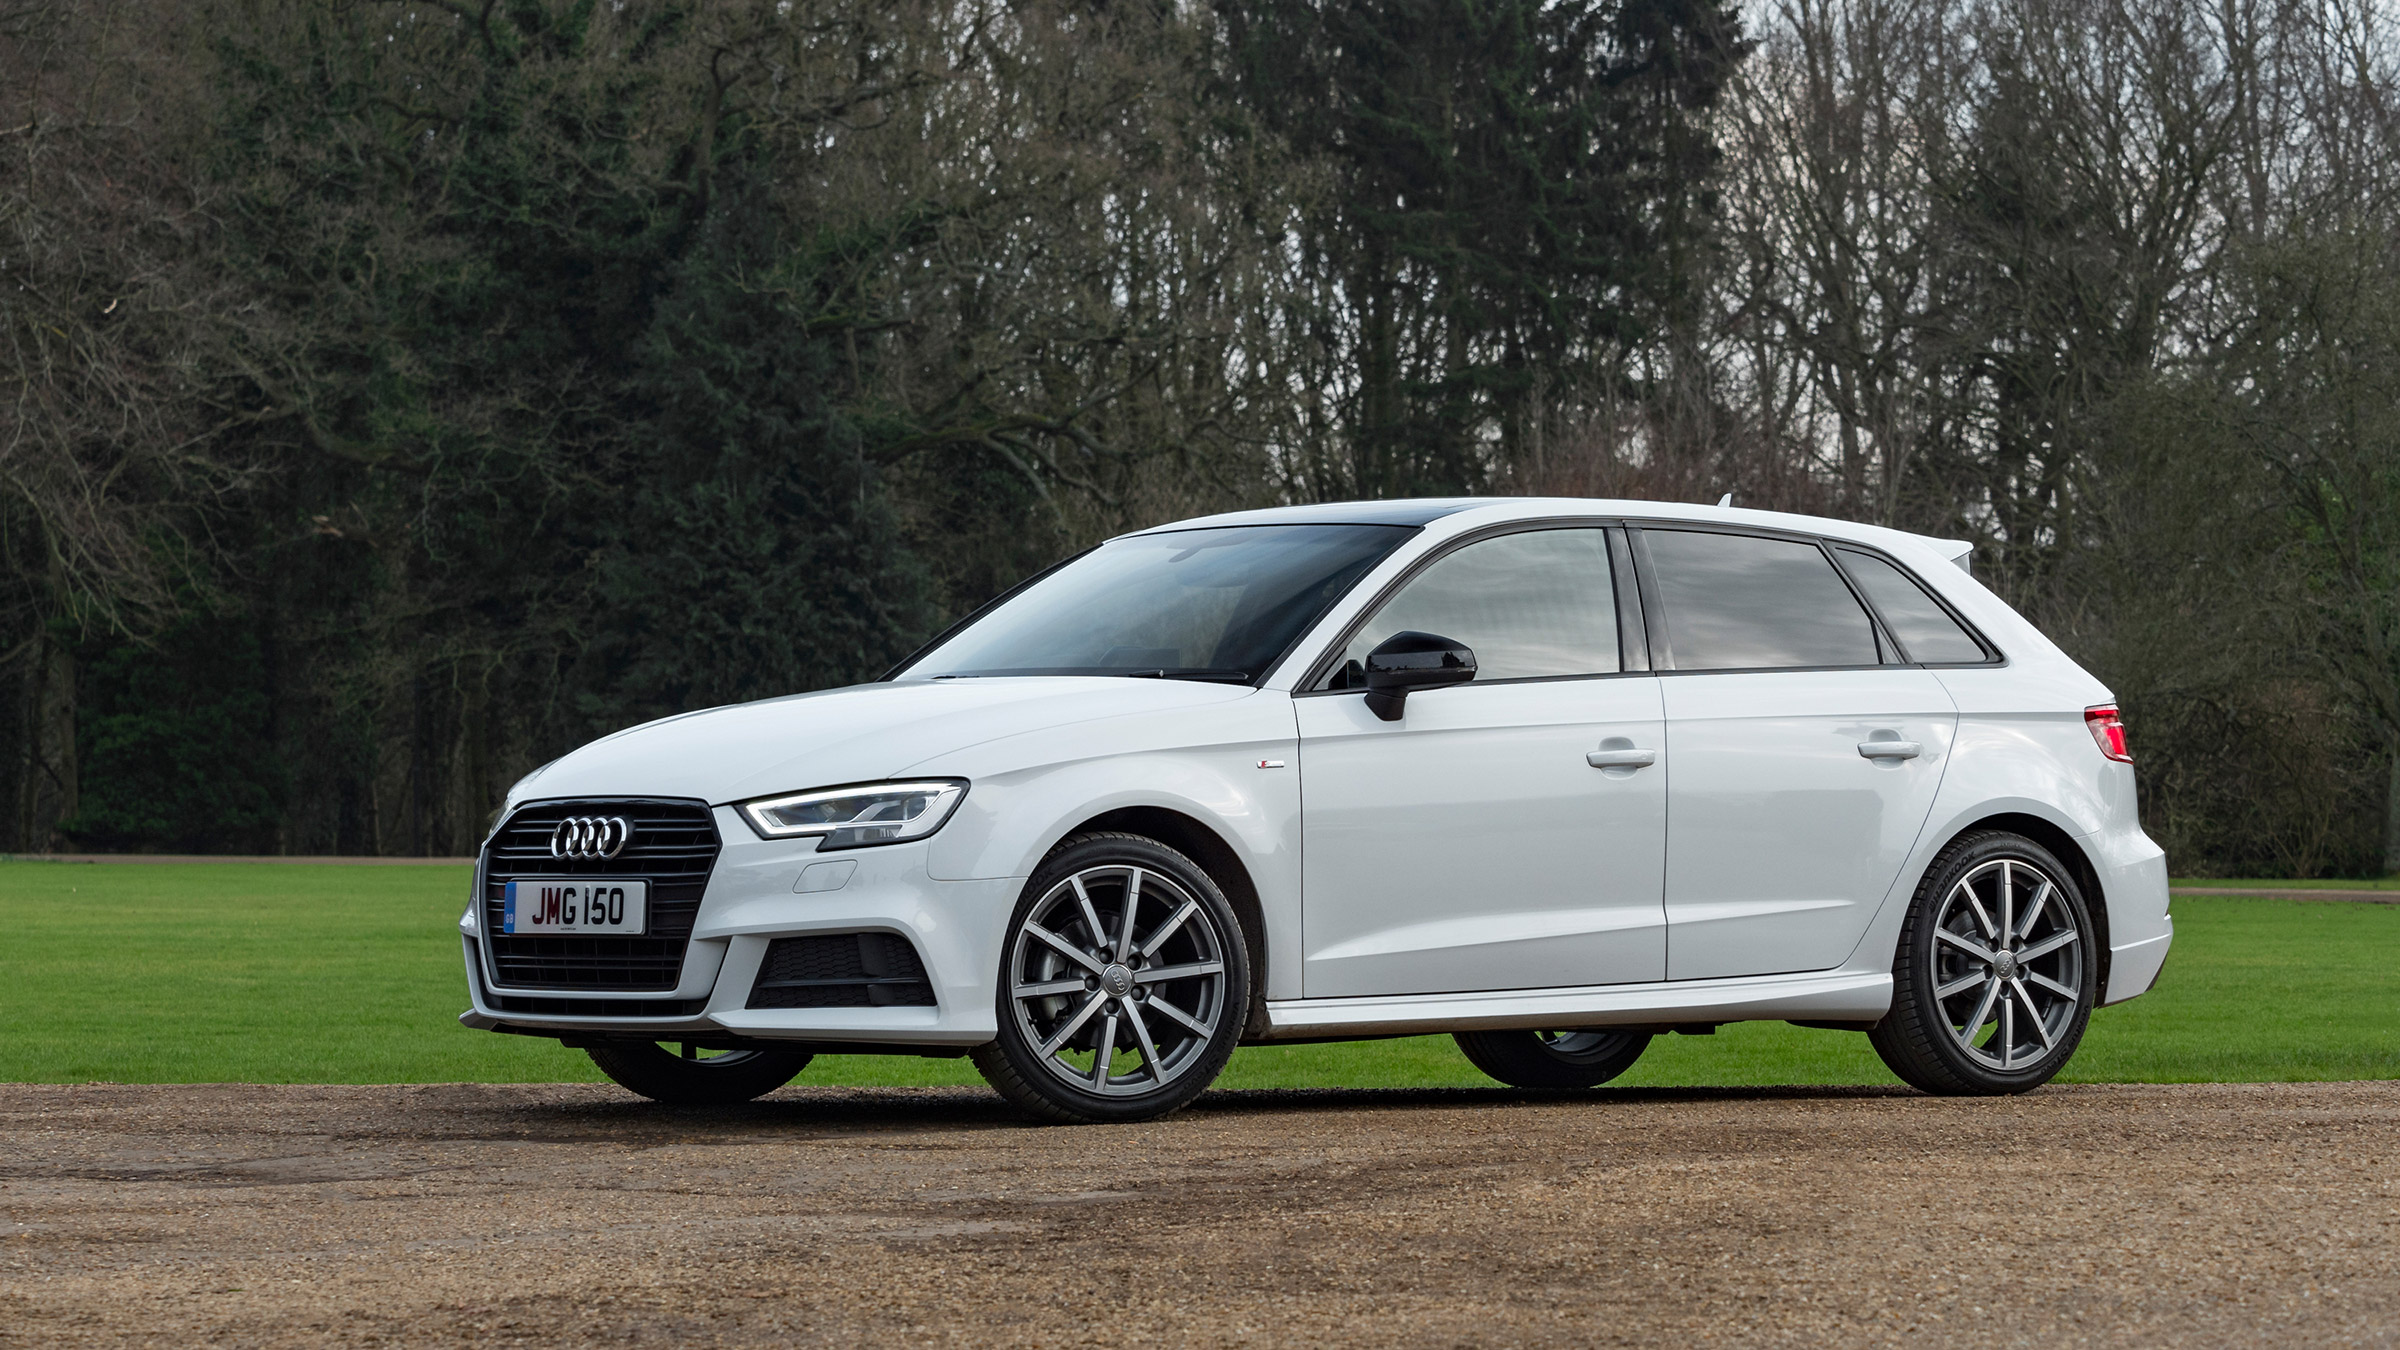 Audi A3 Sportback - prices, and 0-60 time | evo